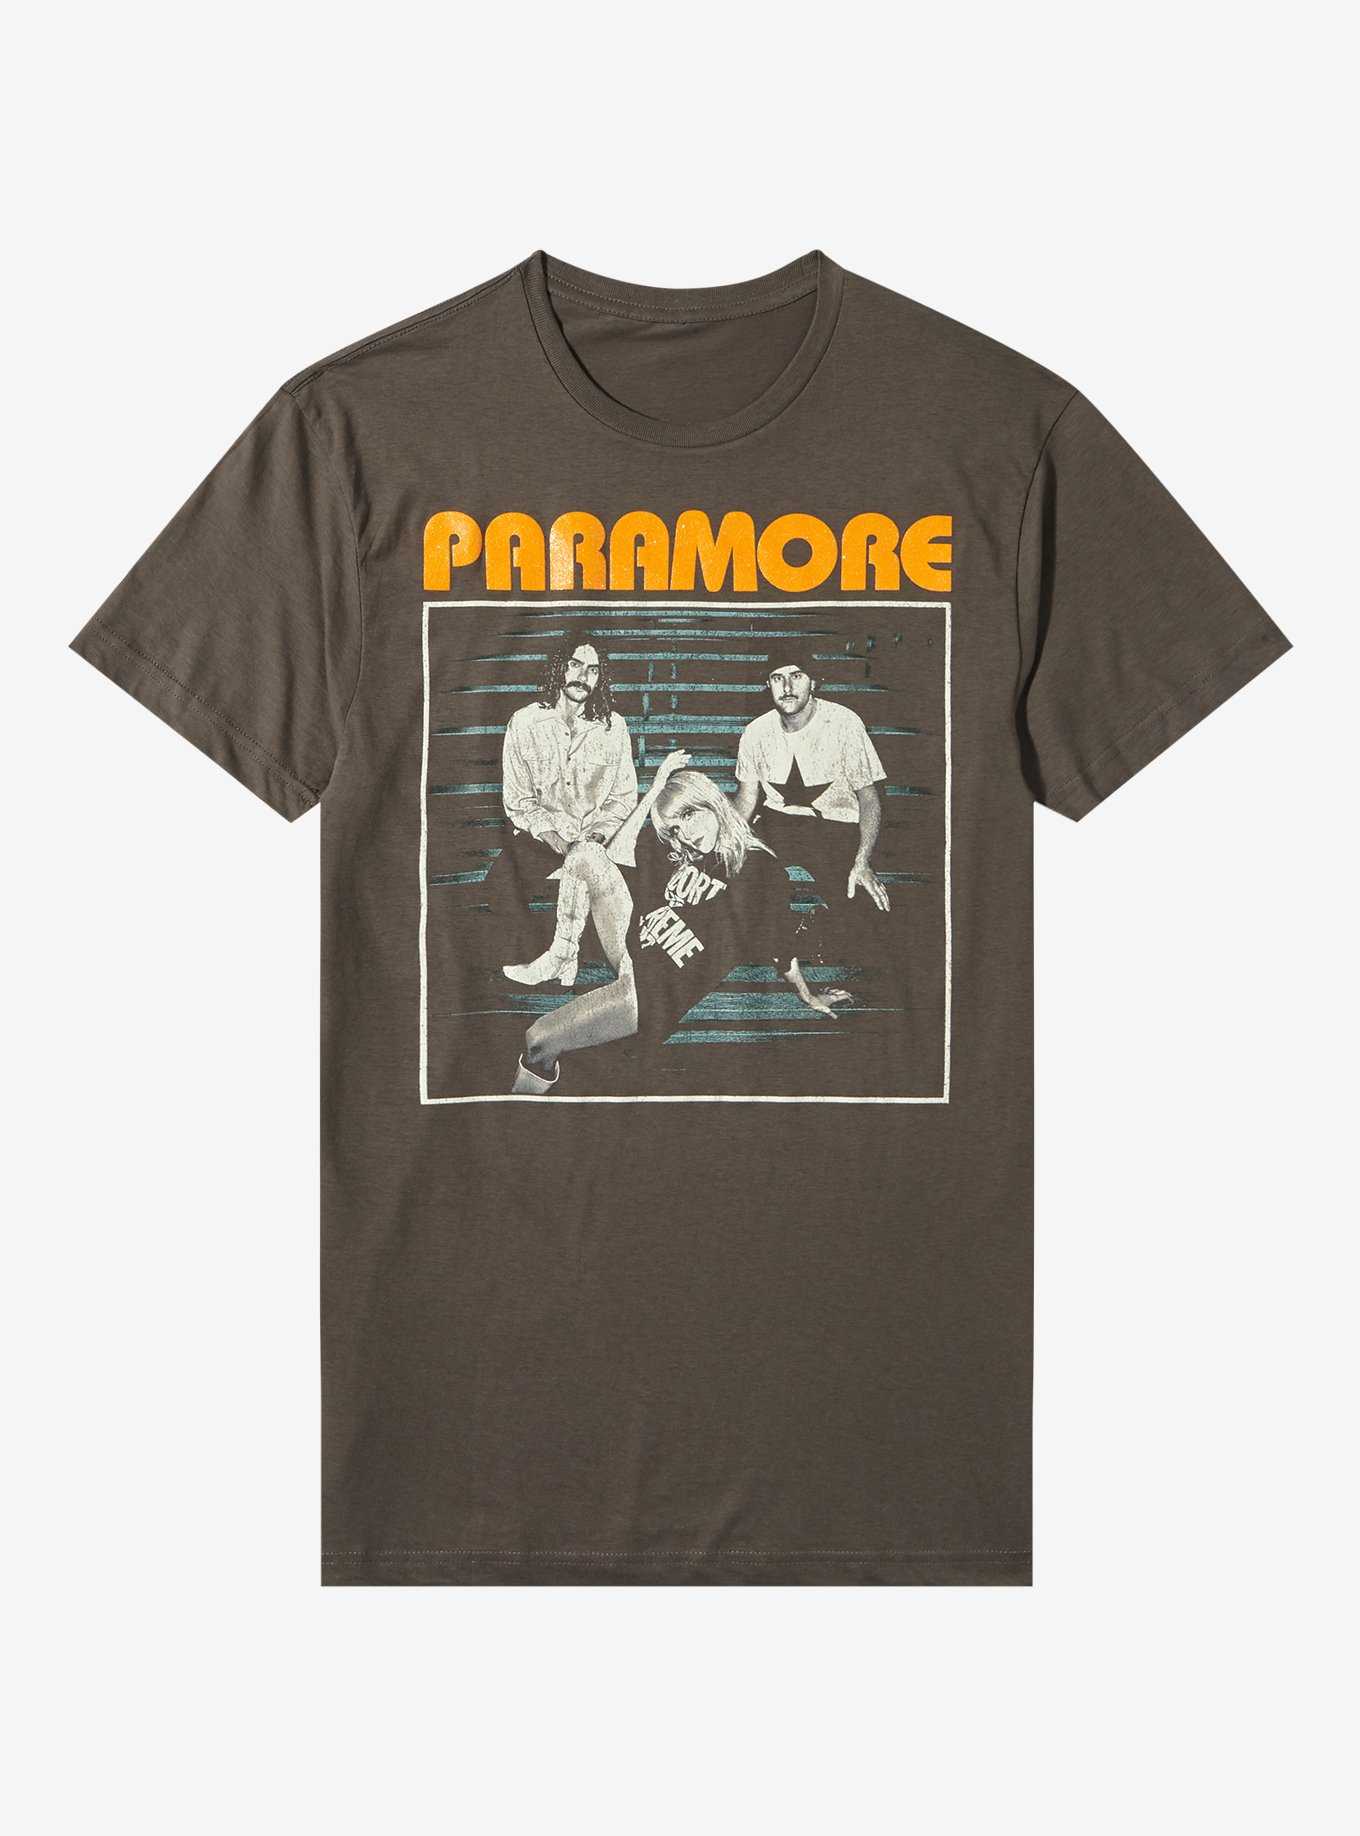 Paramore This Is Why Lyrics Vintage T-Shirt, Paramore Concert Tour 2023  Merch - Print your thoughts. Tell your stories.